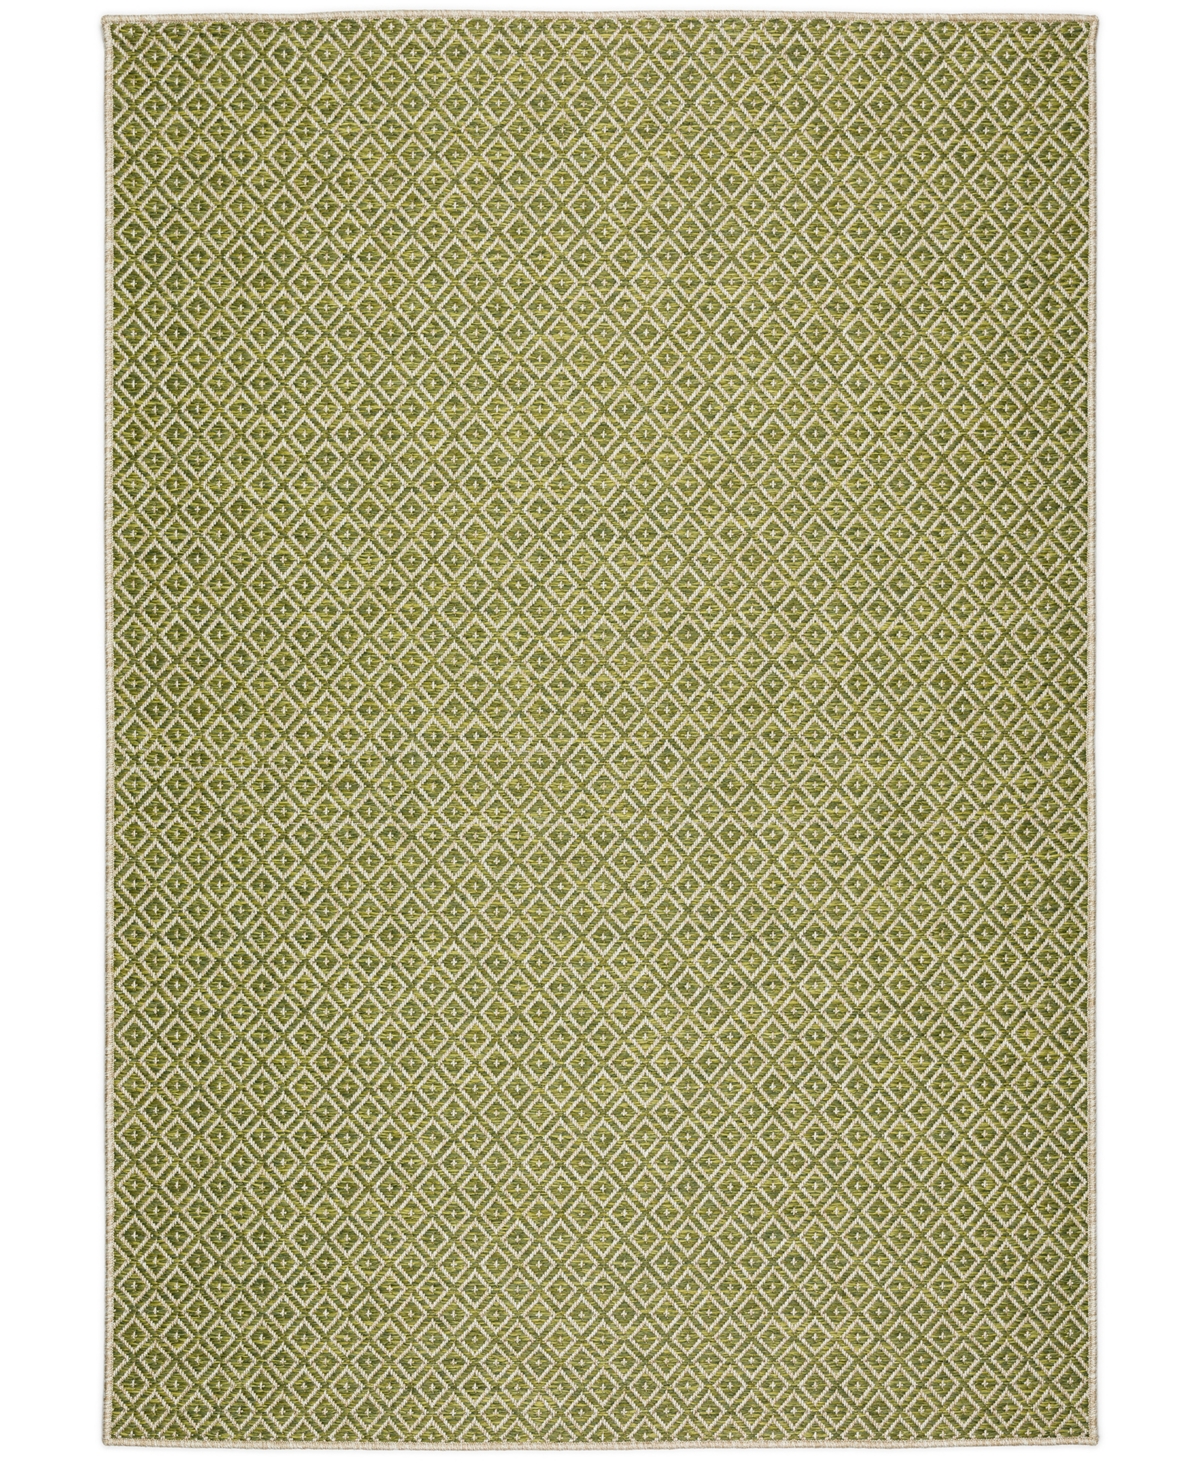 D Style Nusa Outdoor Nsa8 10' X 13' Area Rug In Lime